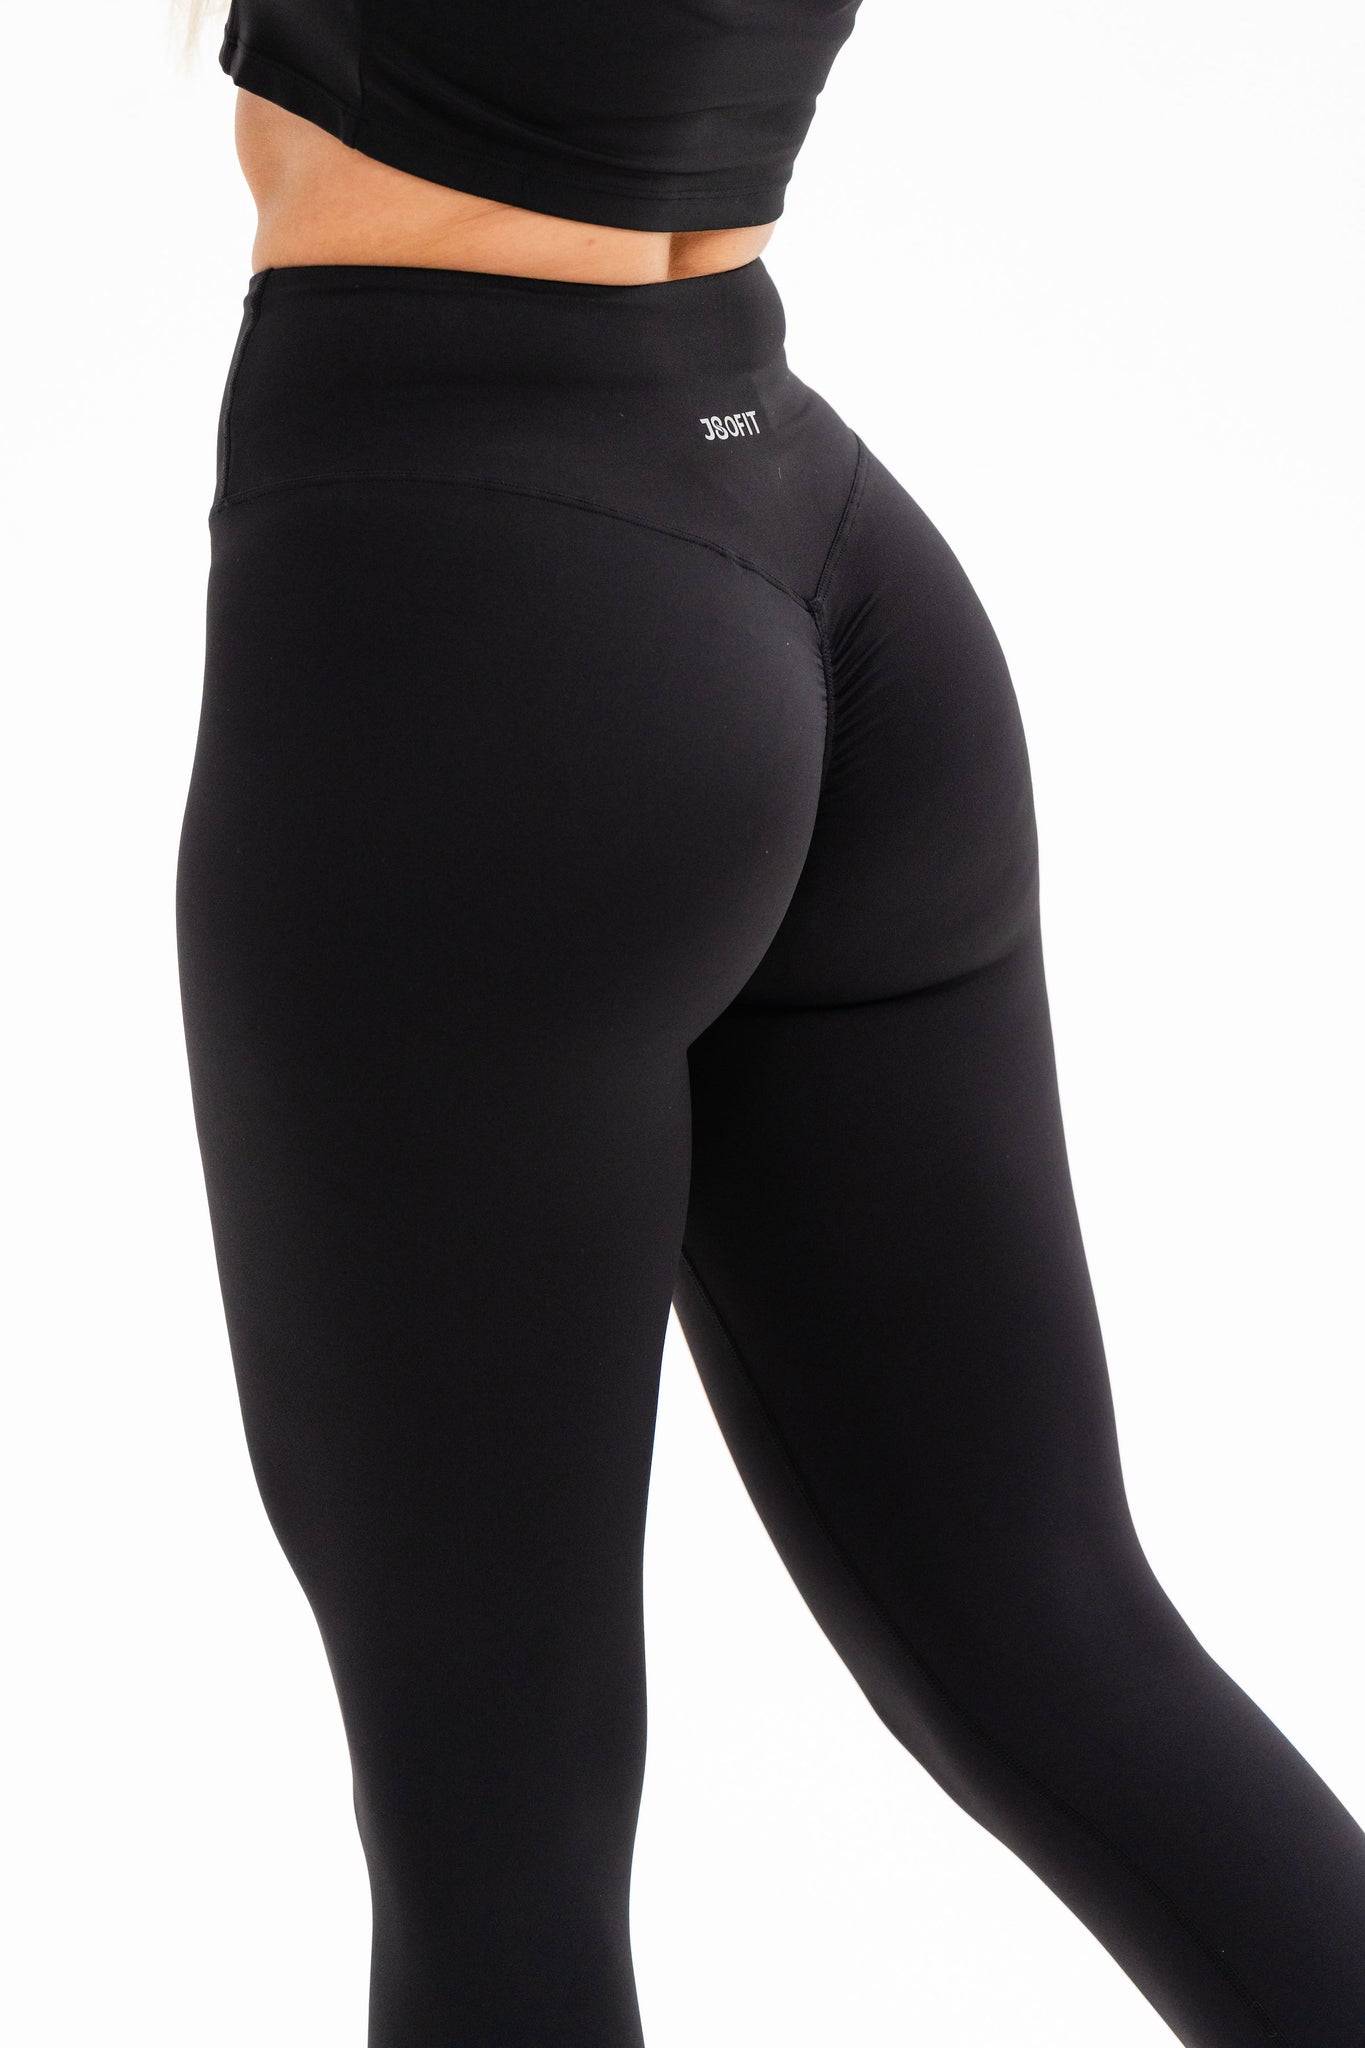 Wolven Leggings Review 2021: 'Next Best Thing To Being Naked